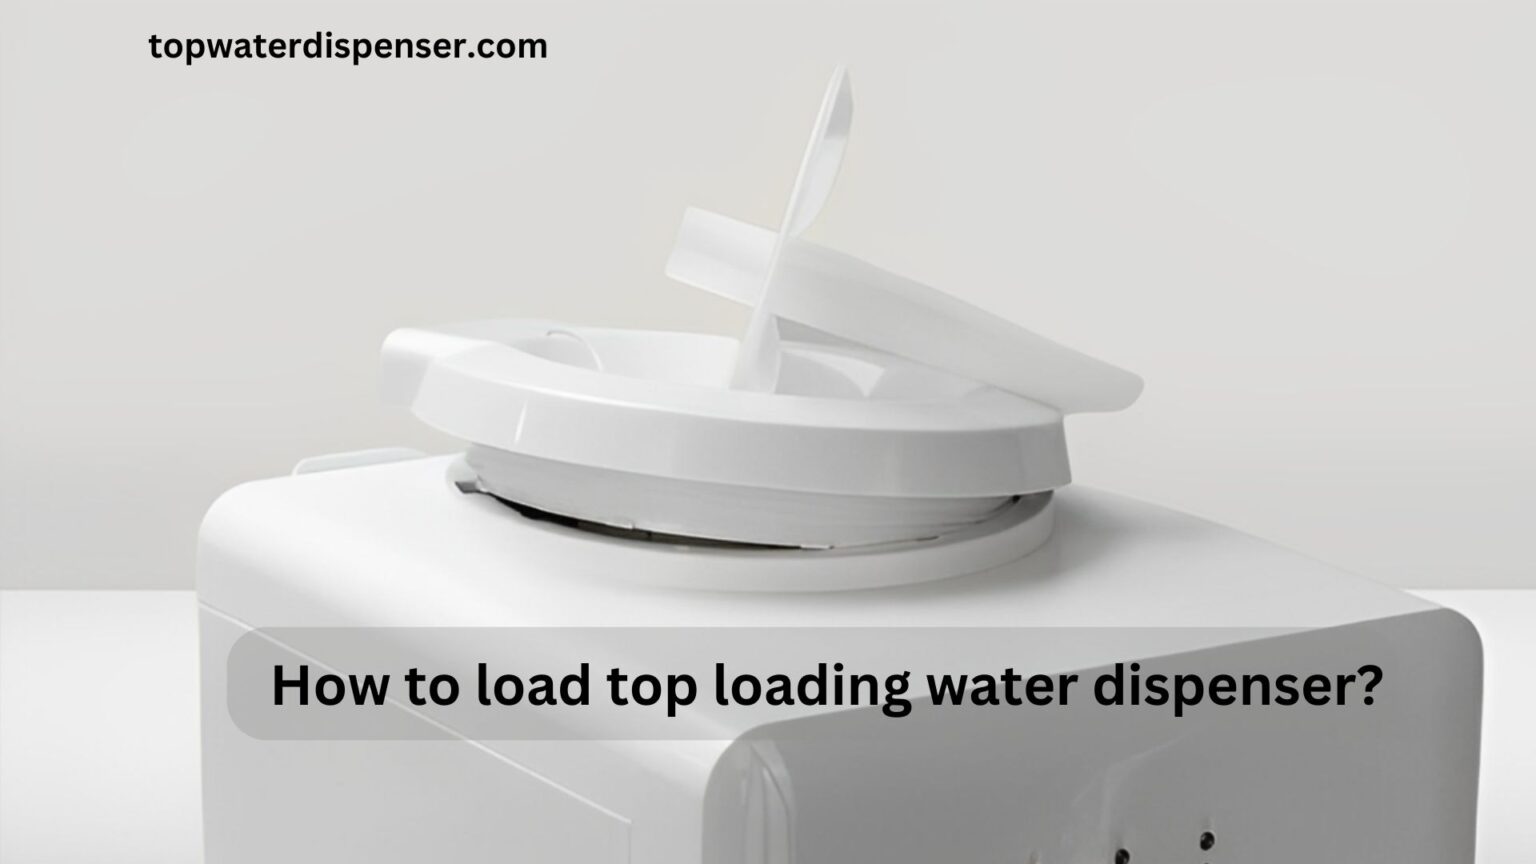 How to load top loading water dispenser?